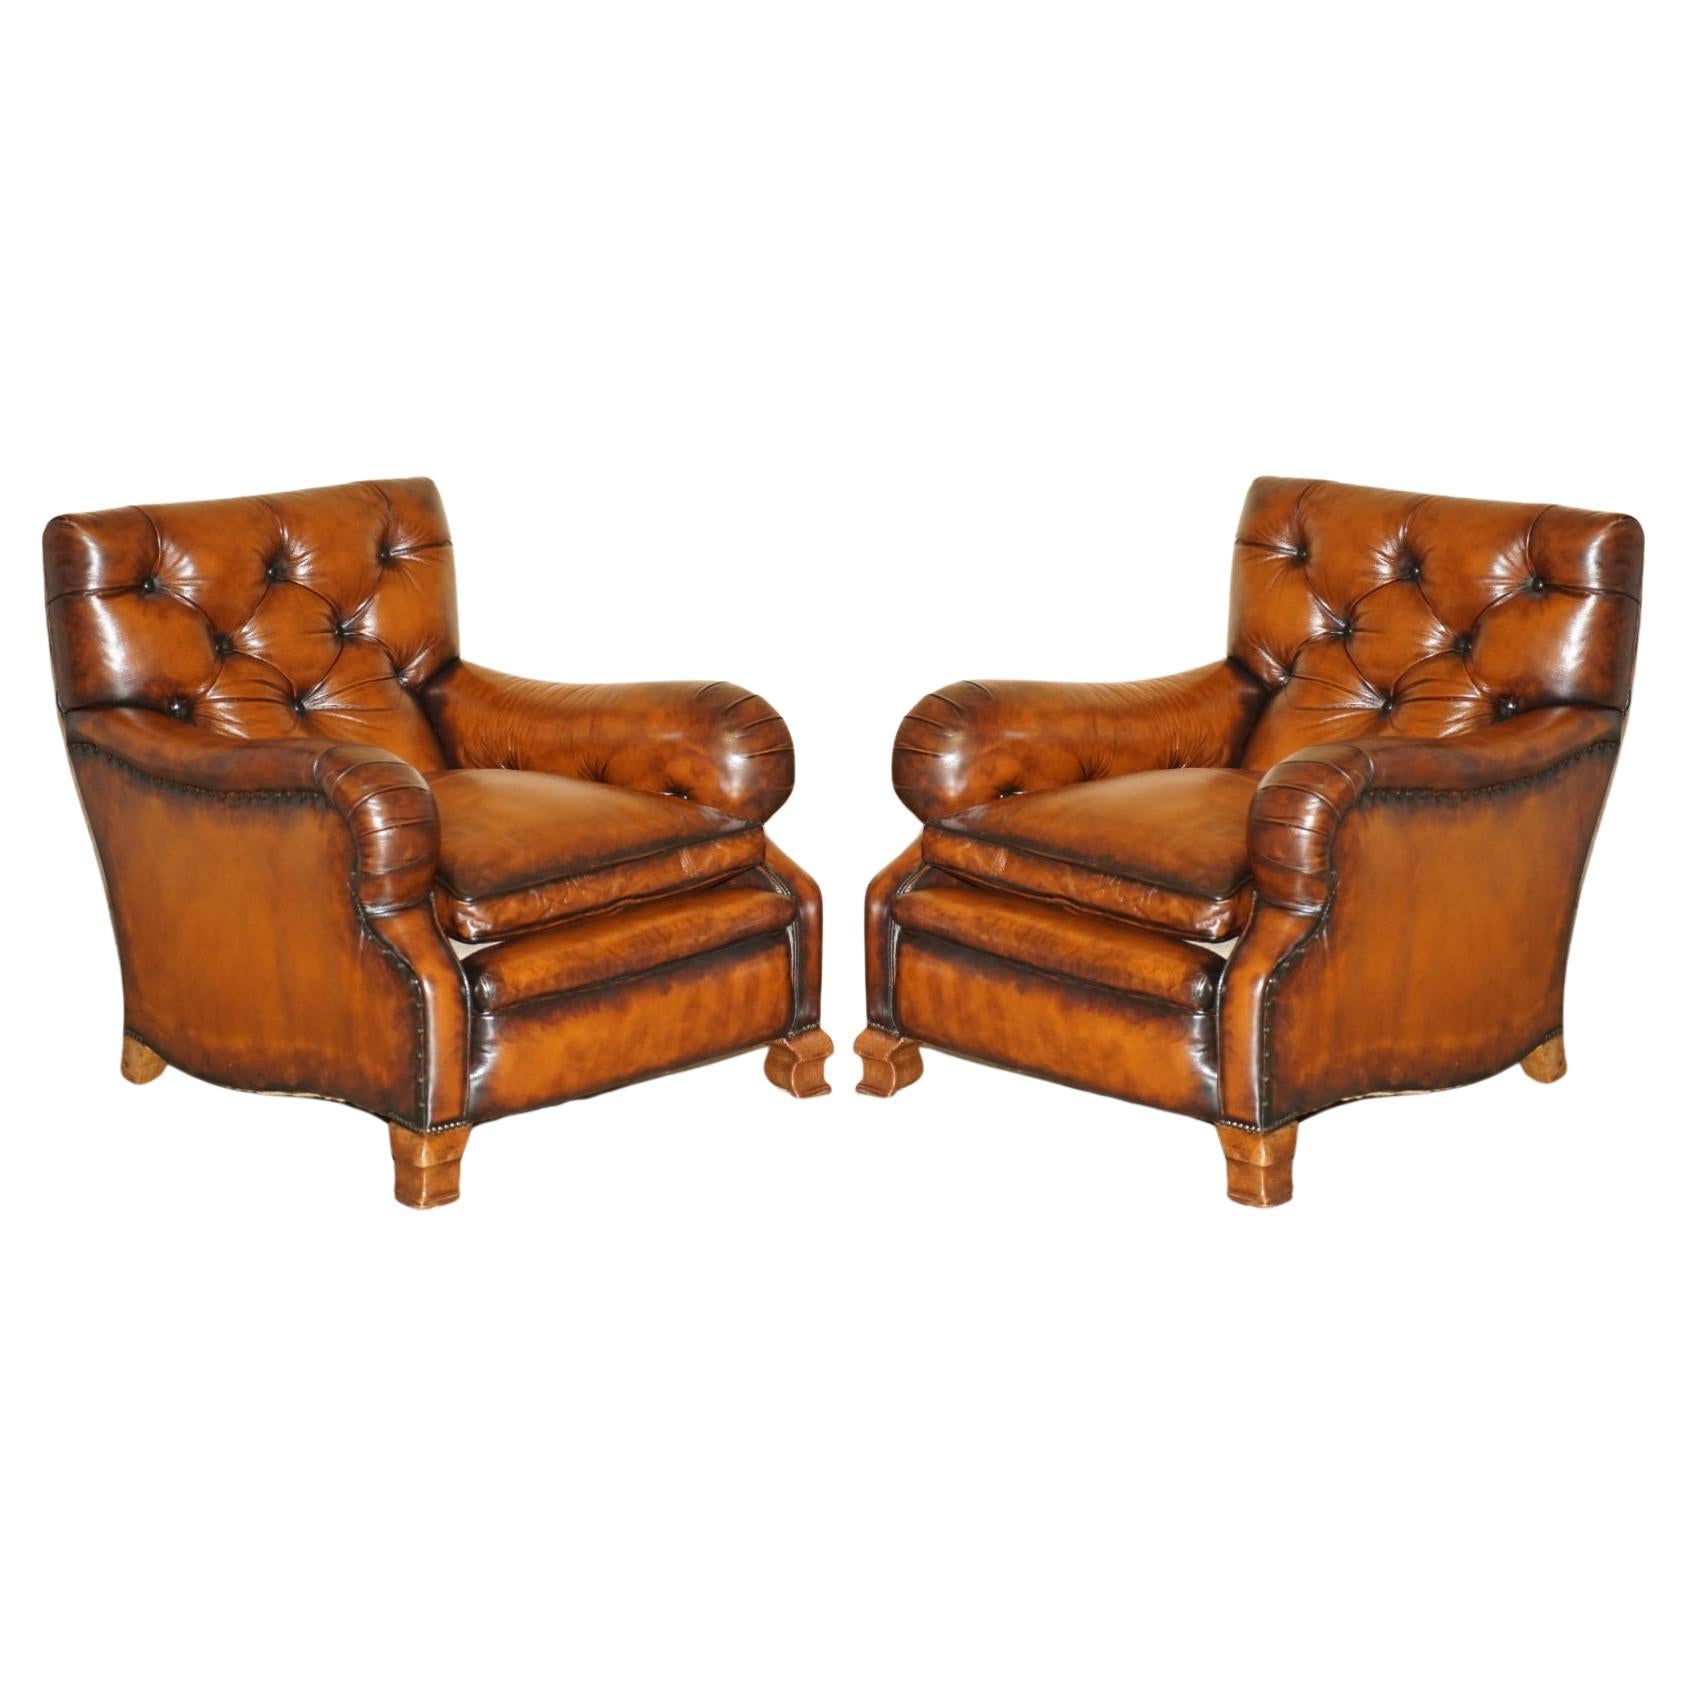 FINE PAIR OF VICTORIAN CHESTERFIELD BROWN LEATHER HOWARD & SON'S STYLE ARMCHAiRS For Sale